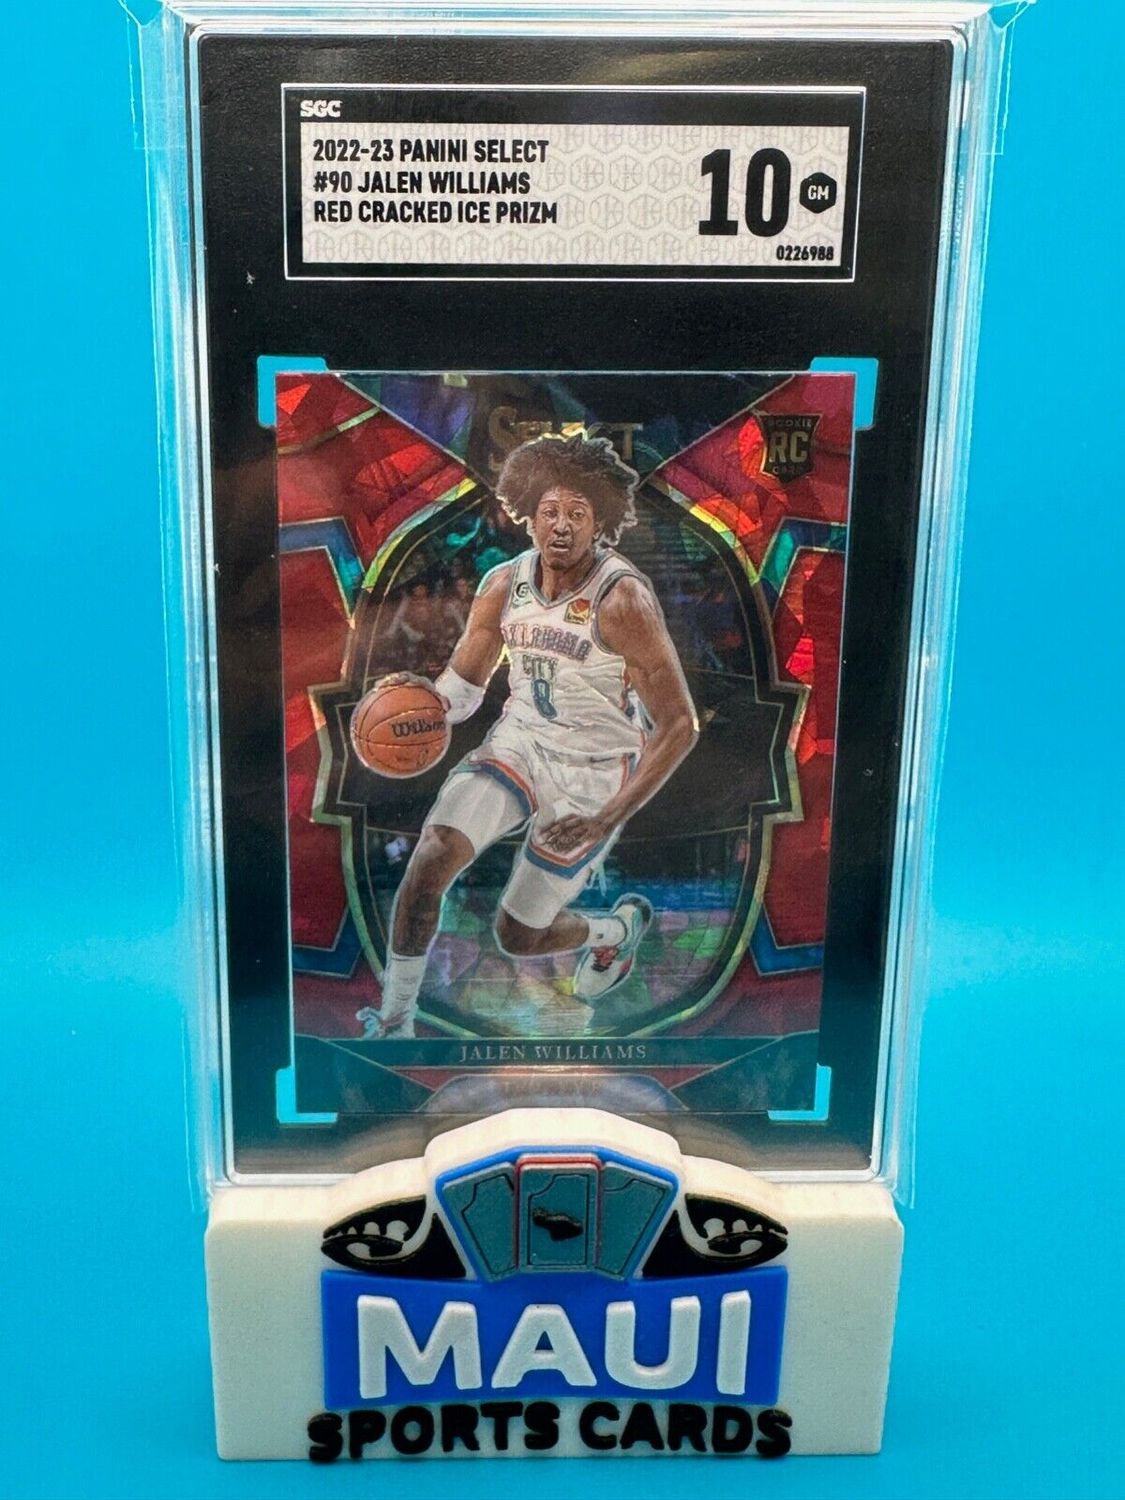 2022-23 PANINI SELECT SGC 10 RC JALEN WILLIAMS RED CRACKED ICE PRIZM #90